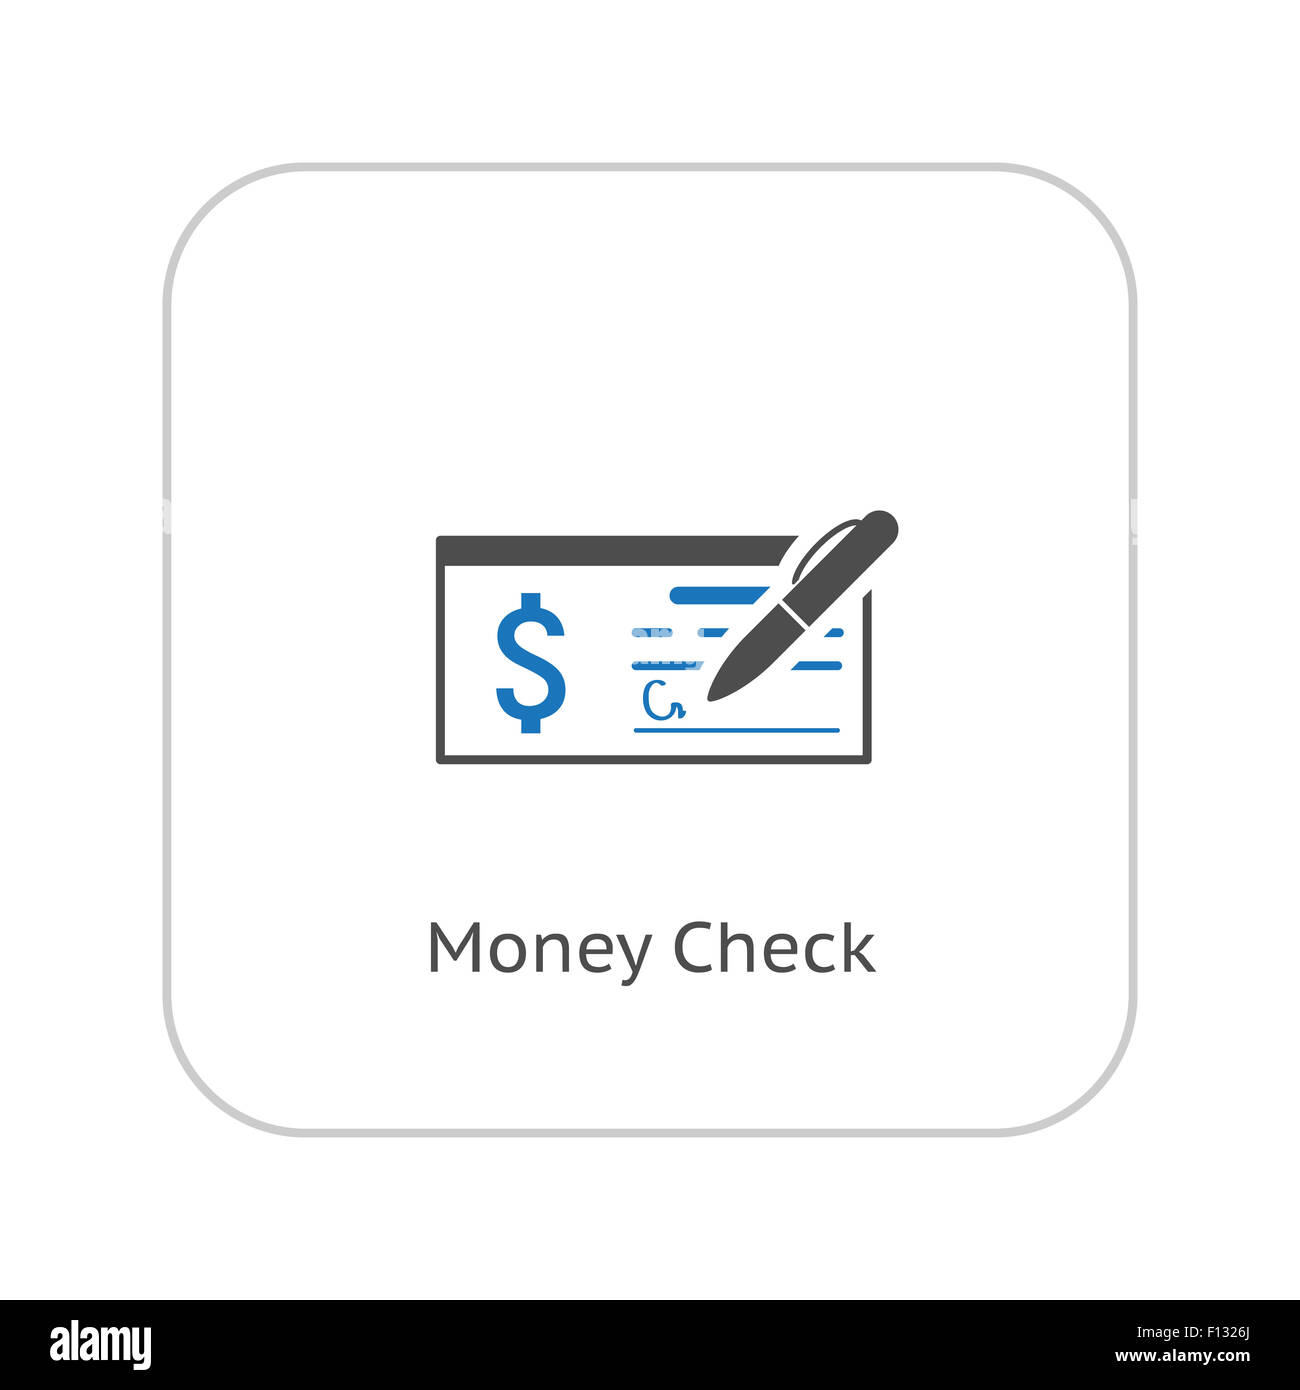 Money Check with Pen Business Icon. Flat Design. Stock Photo